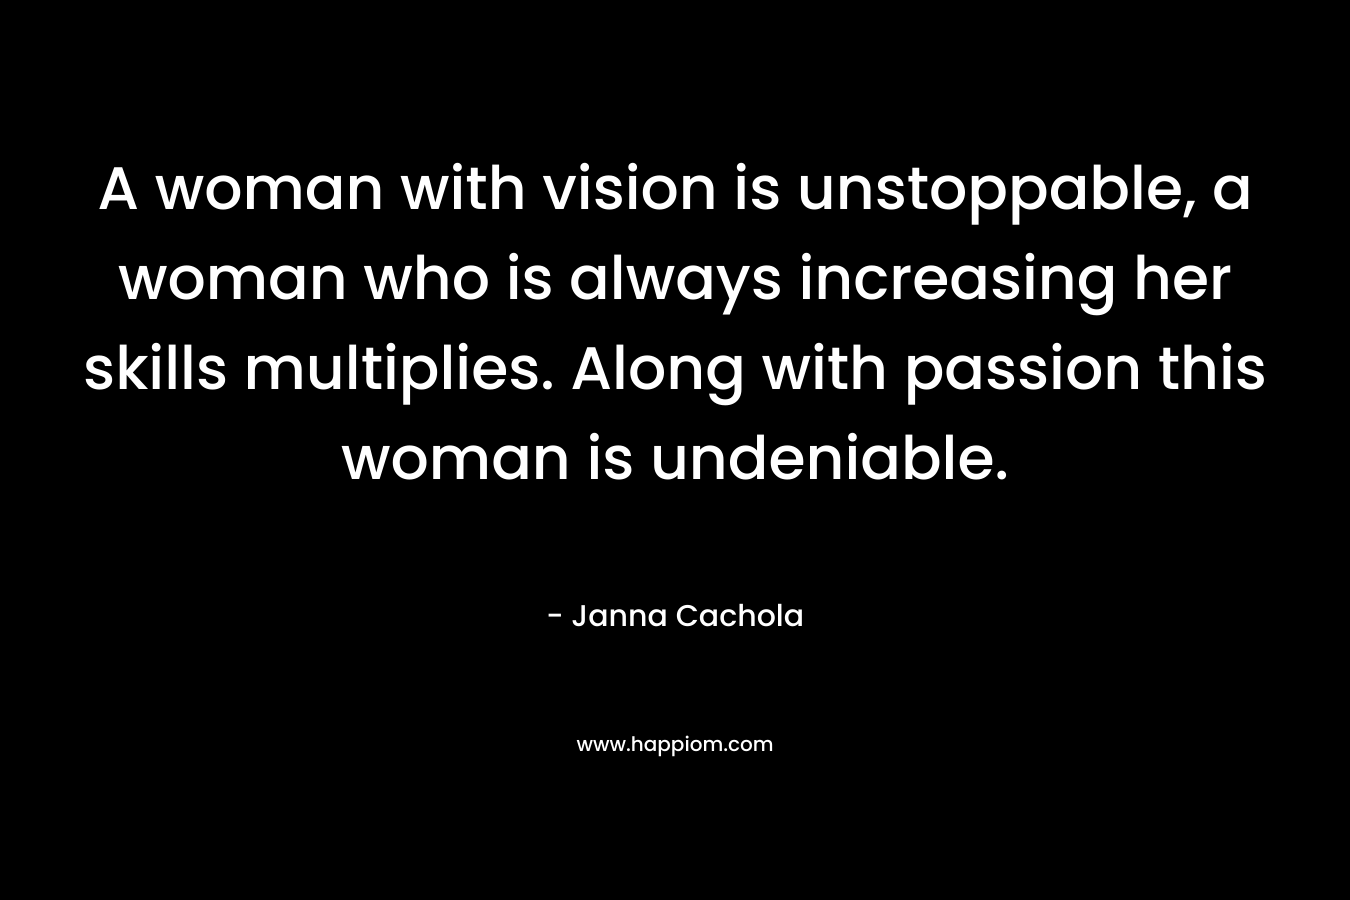 A woman with vision is unstoppable, a woman who is always increasing her skills multiplies. Along with passion this woman is undeniable.